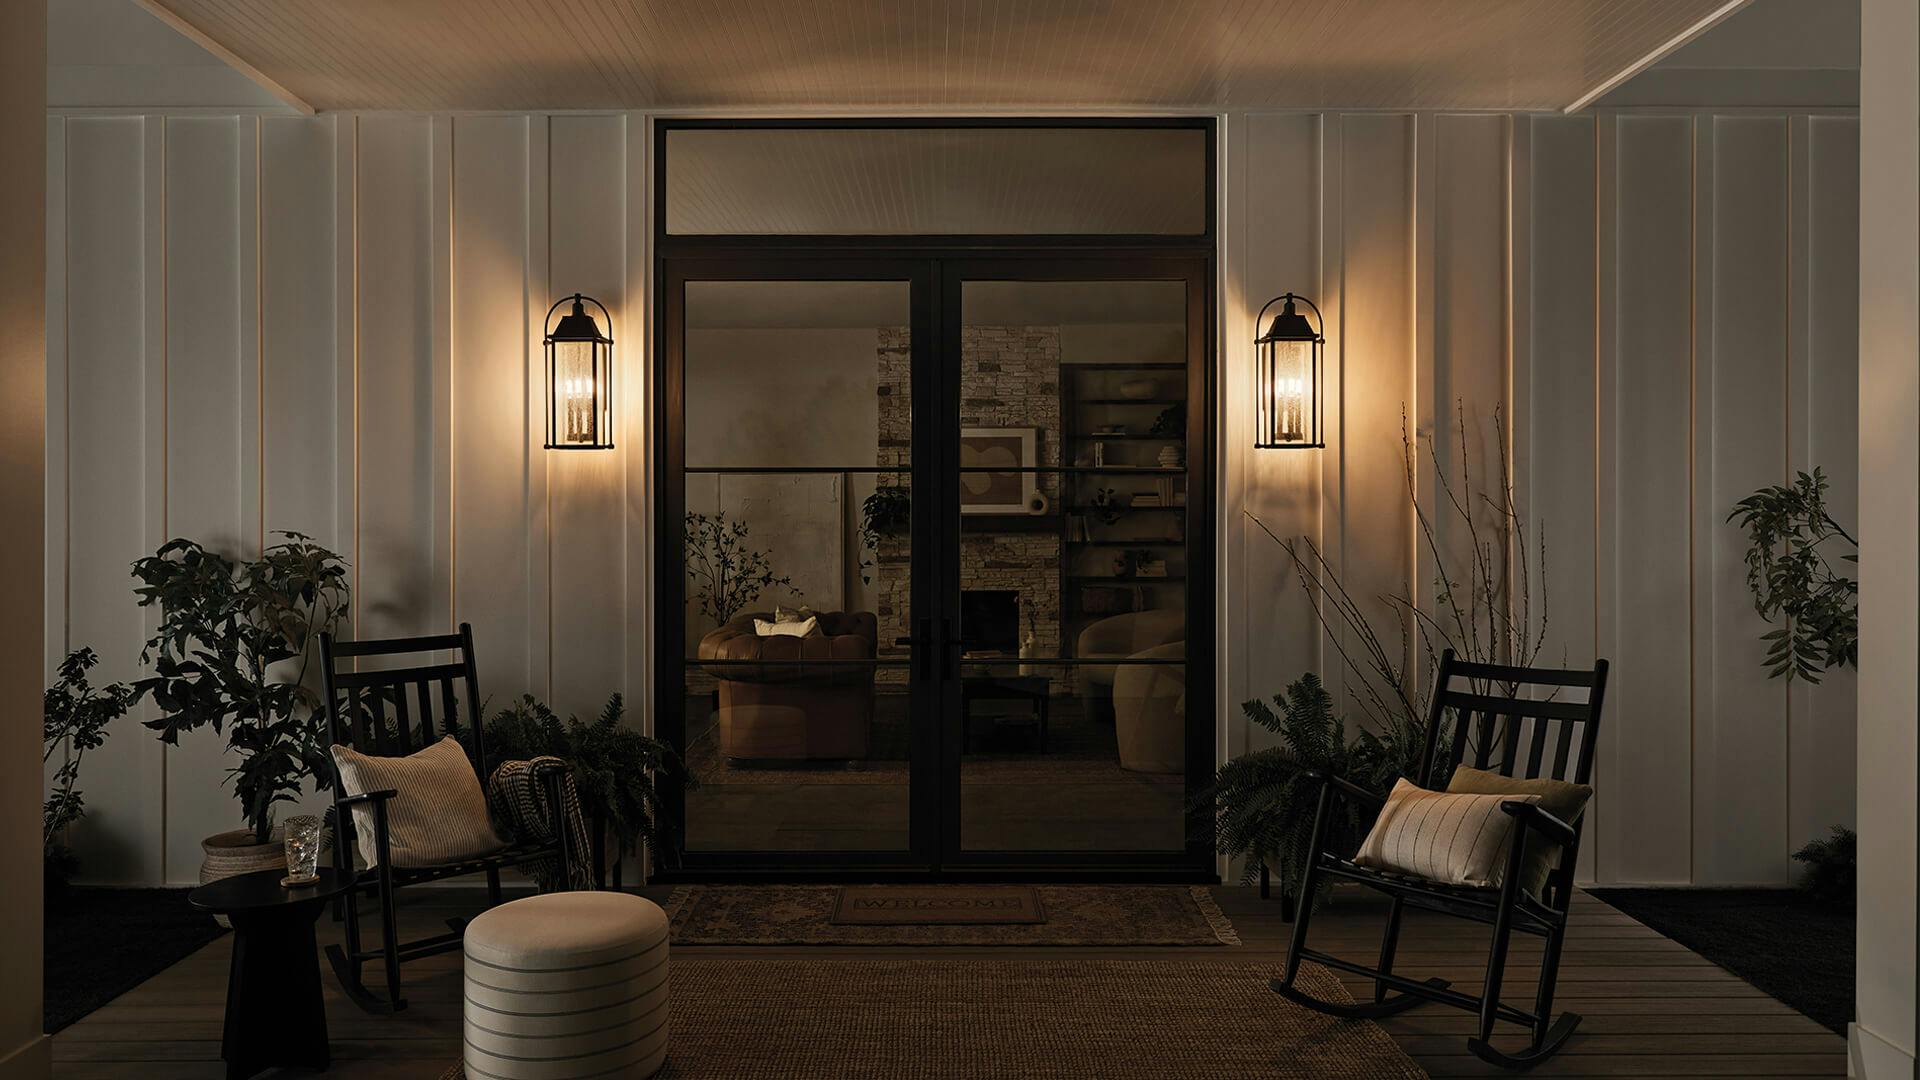 Covered patio with two rocking chairs and glass entry door flanked by two Harbor Row wall lights at night